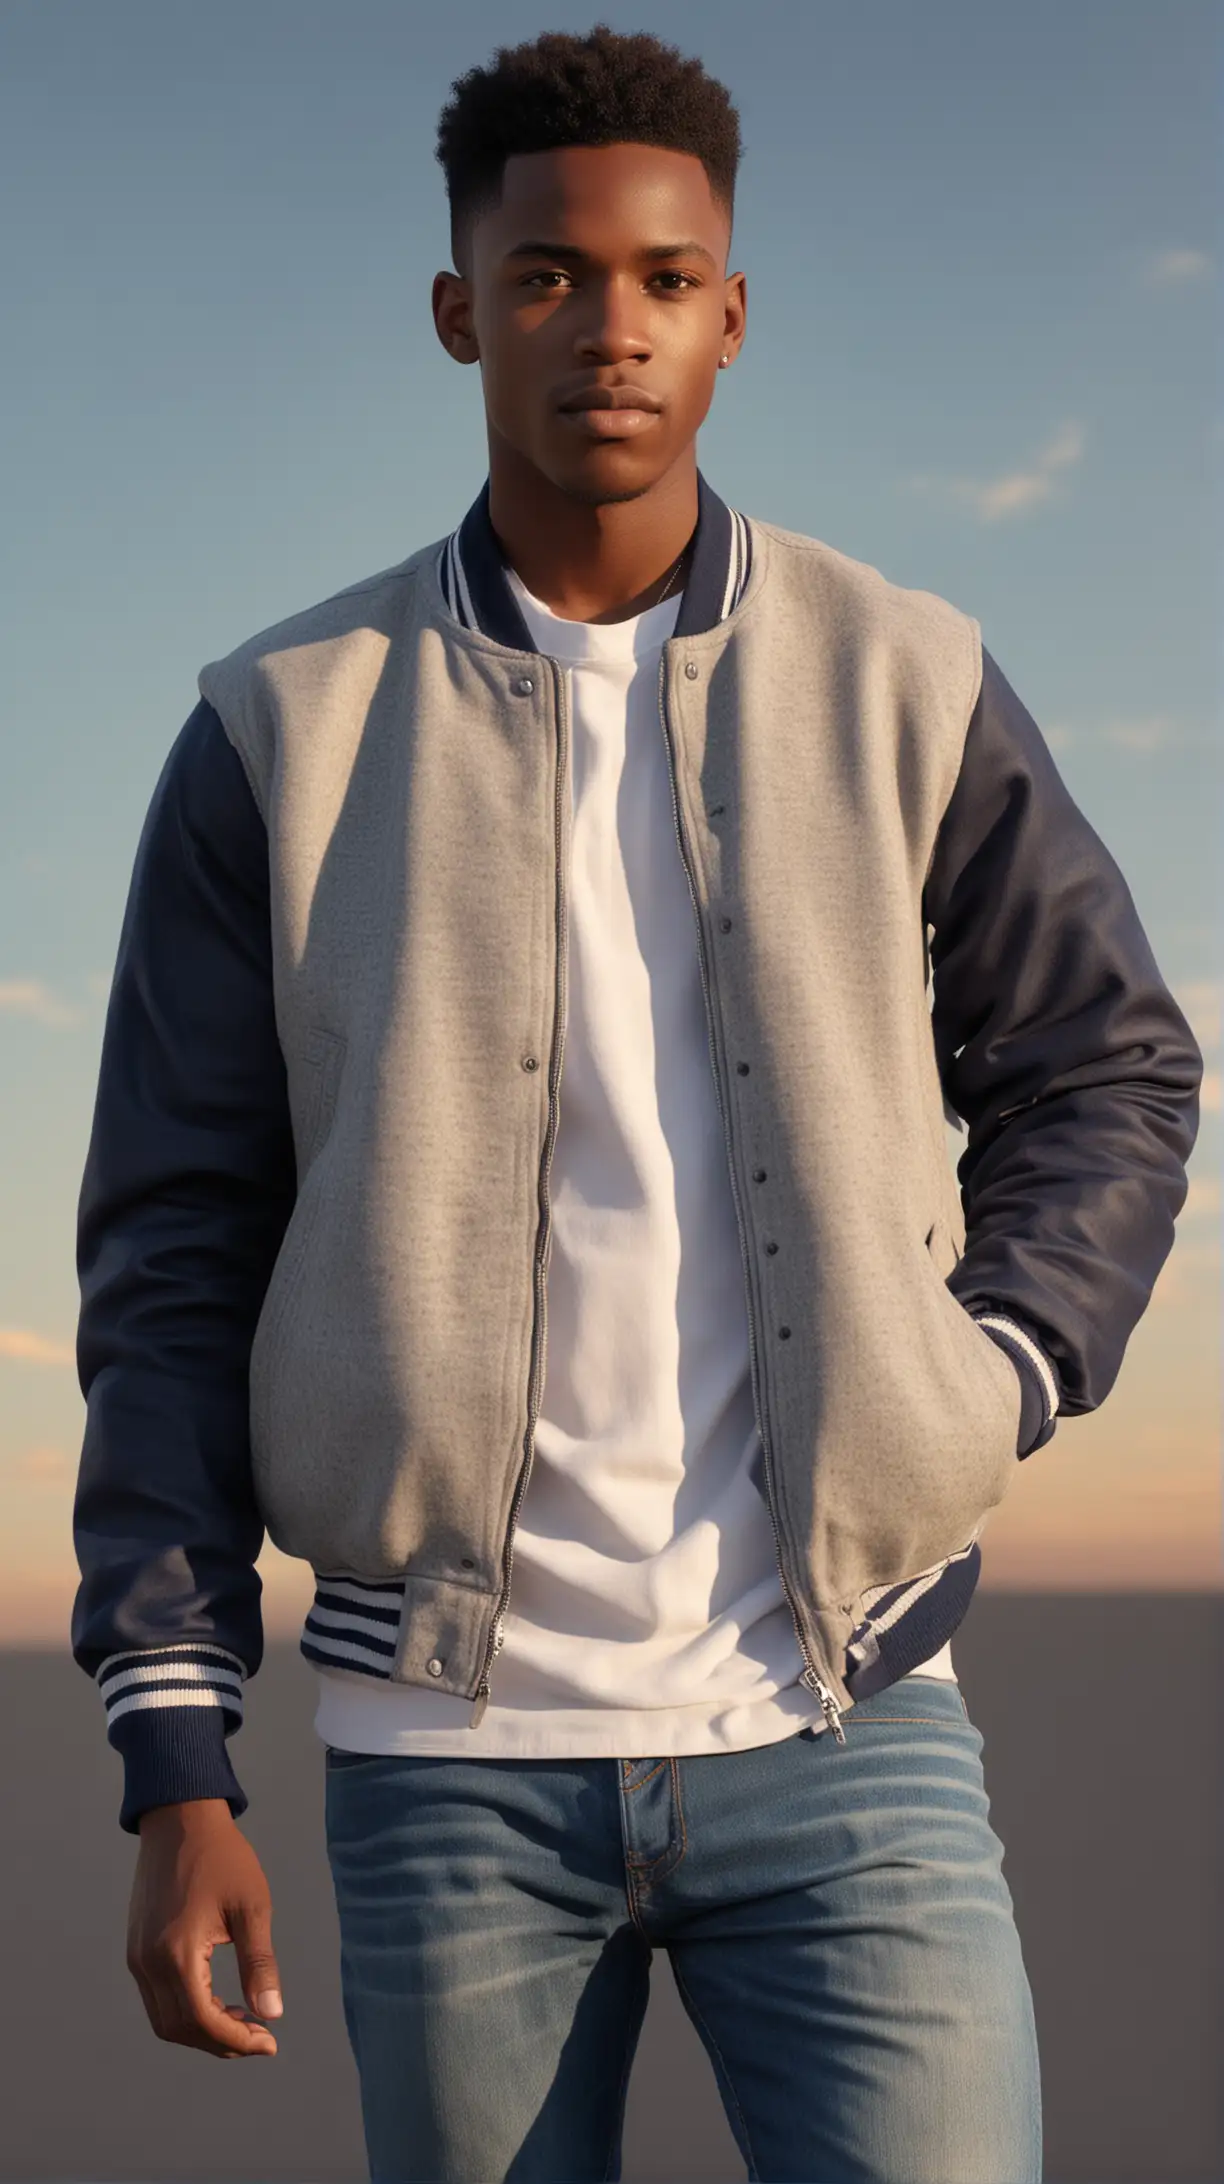 Attractive, young, African male, wearing, a low fade hairstyle, wearing a light grey, melton wool baseball jacket with Navy Blue sleeves, zip front, wearing blue jeans, looking past the camera, time of day is afternoon, the sky is bright, lighting is Volumetric, hyper realistic detail and full 4k resolution.